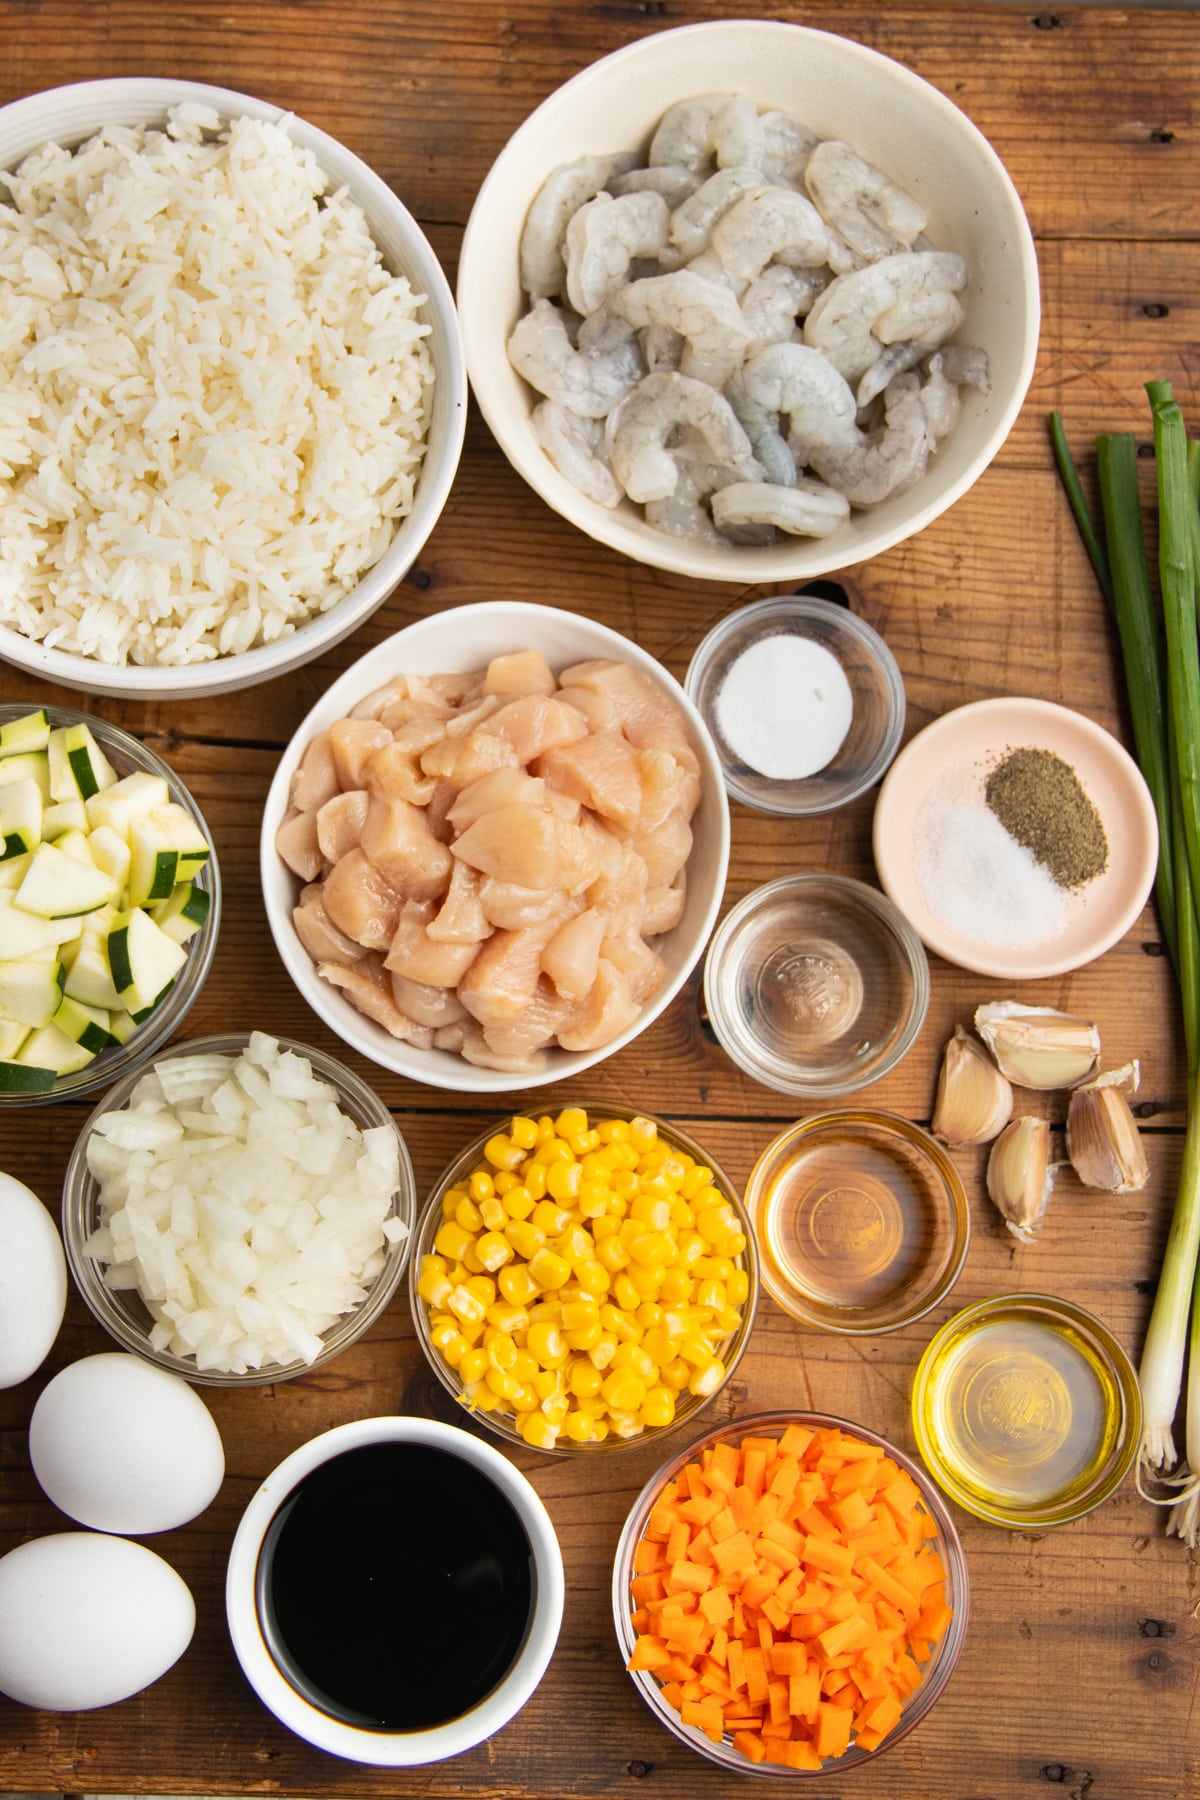 This is a picture of all the individual ingredients to make this recipe.